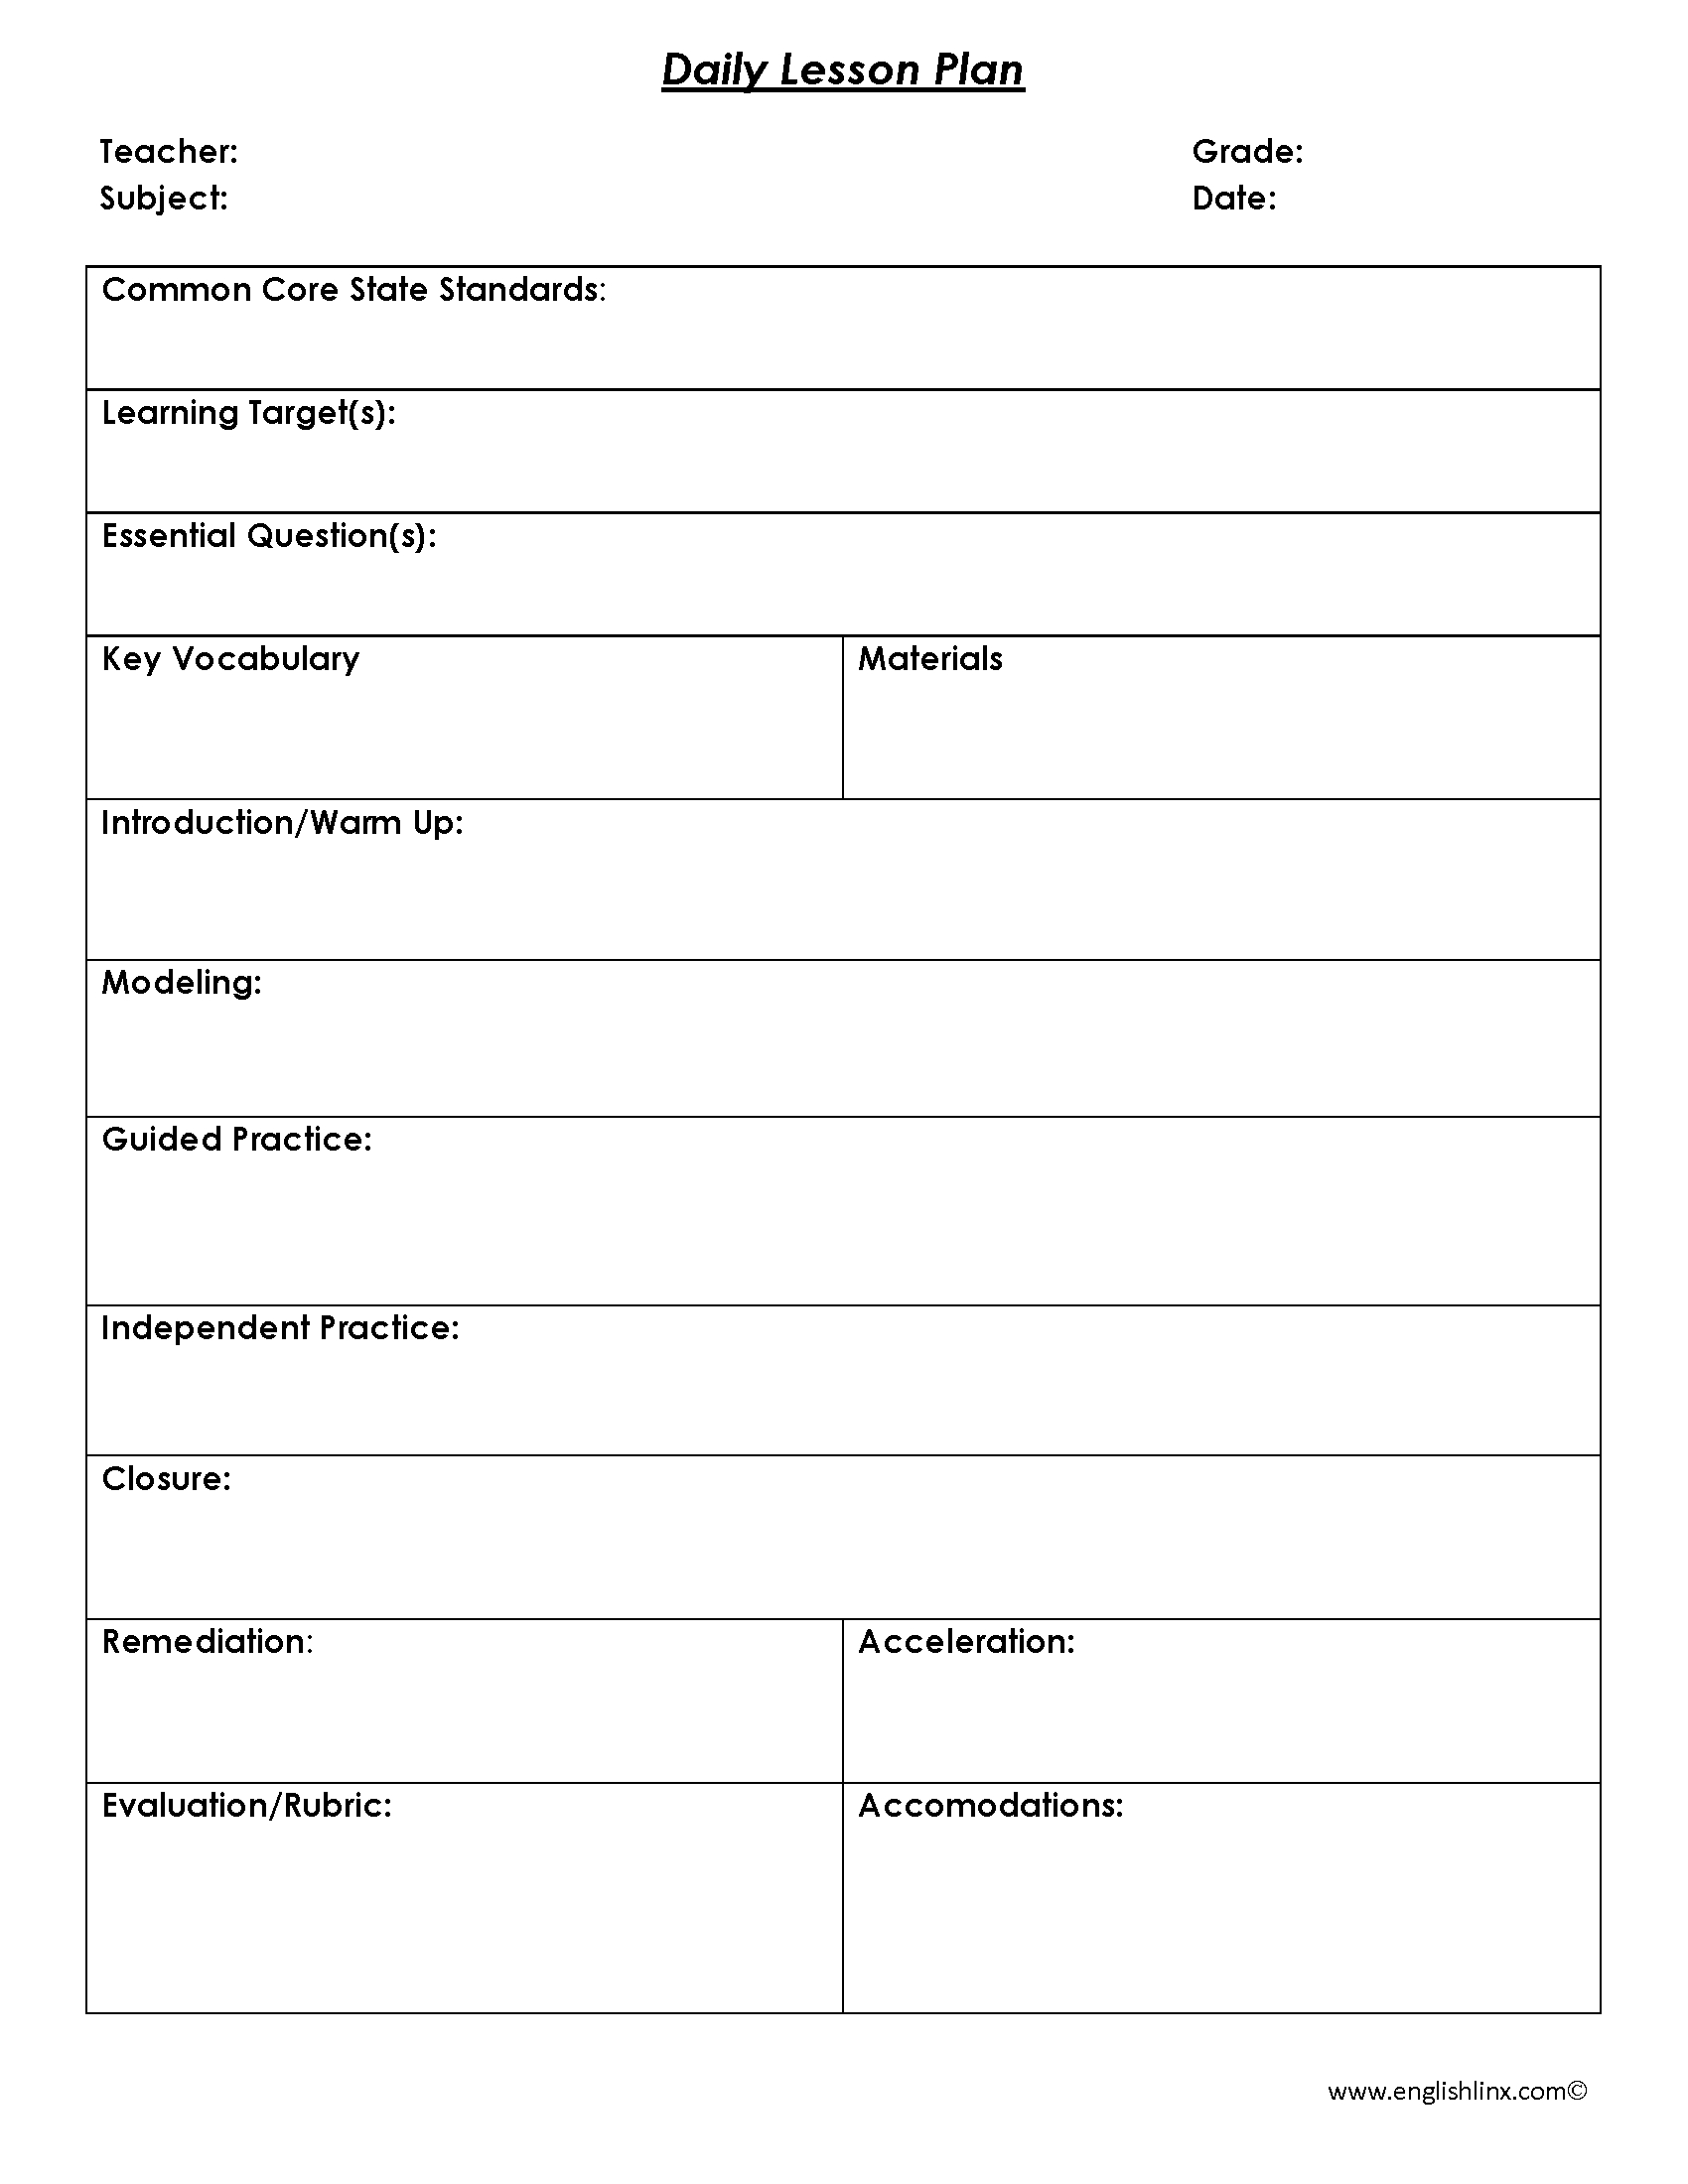 Daily Lesson Plan Template | Daily Lesson Plan, Stem Lesson